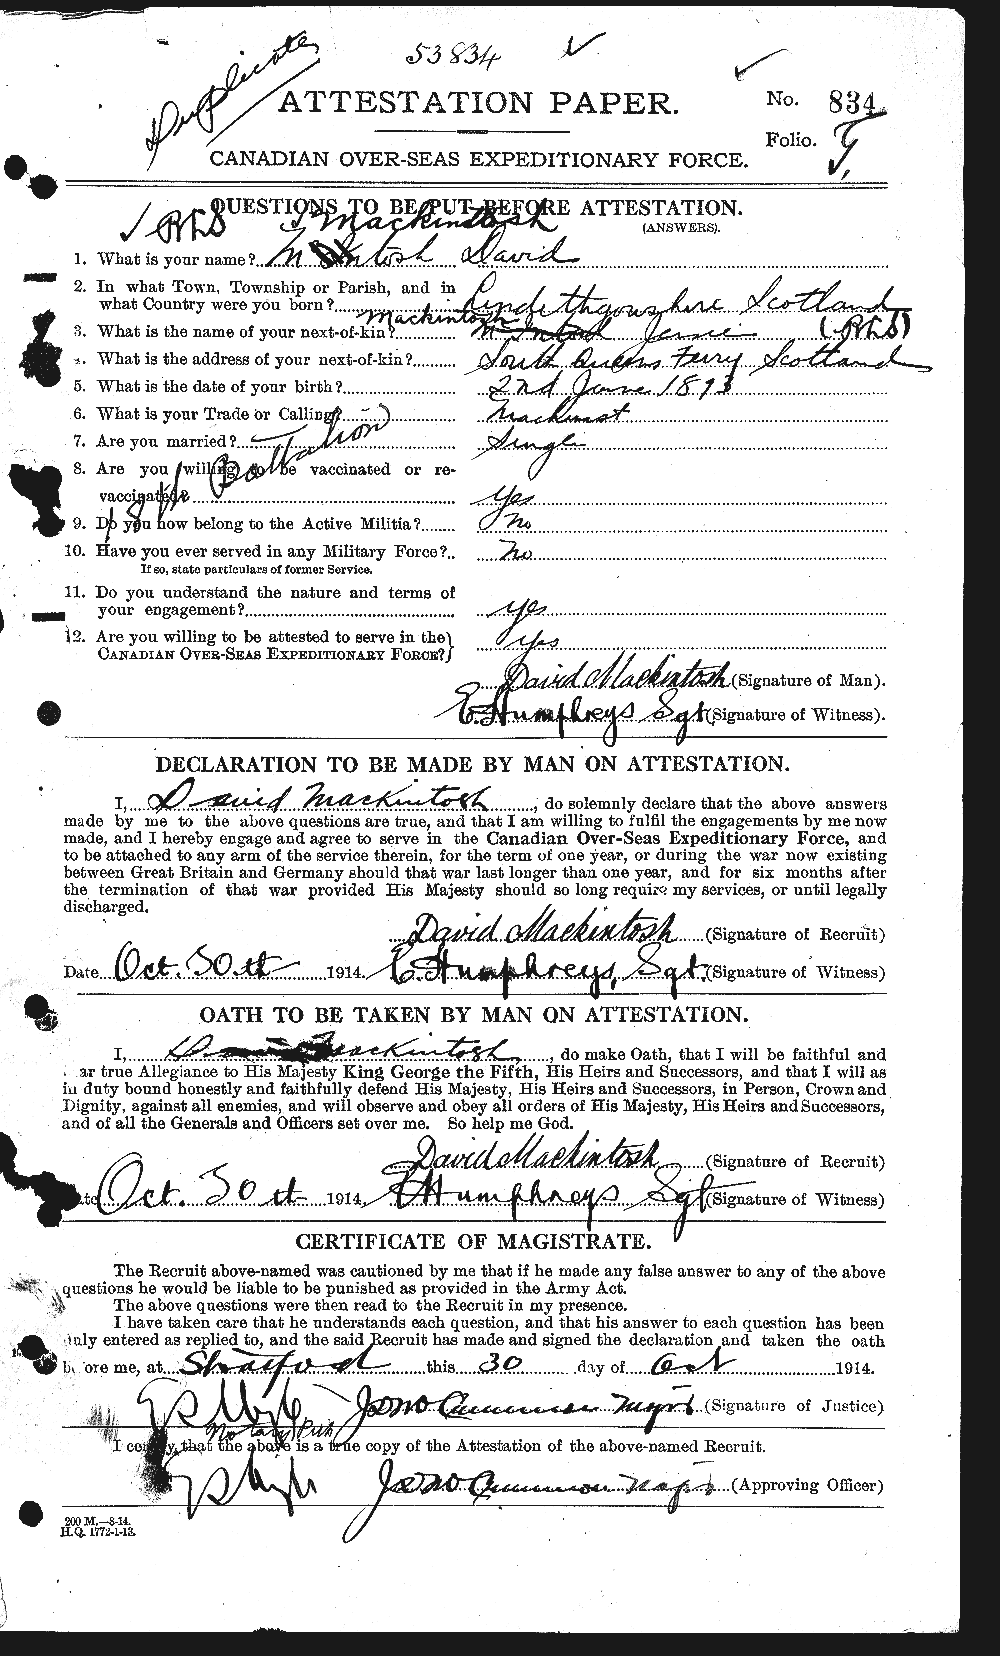 Personnel Records of the First World War - CEF 530590a